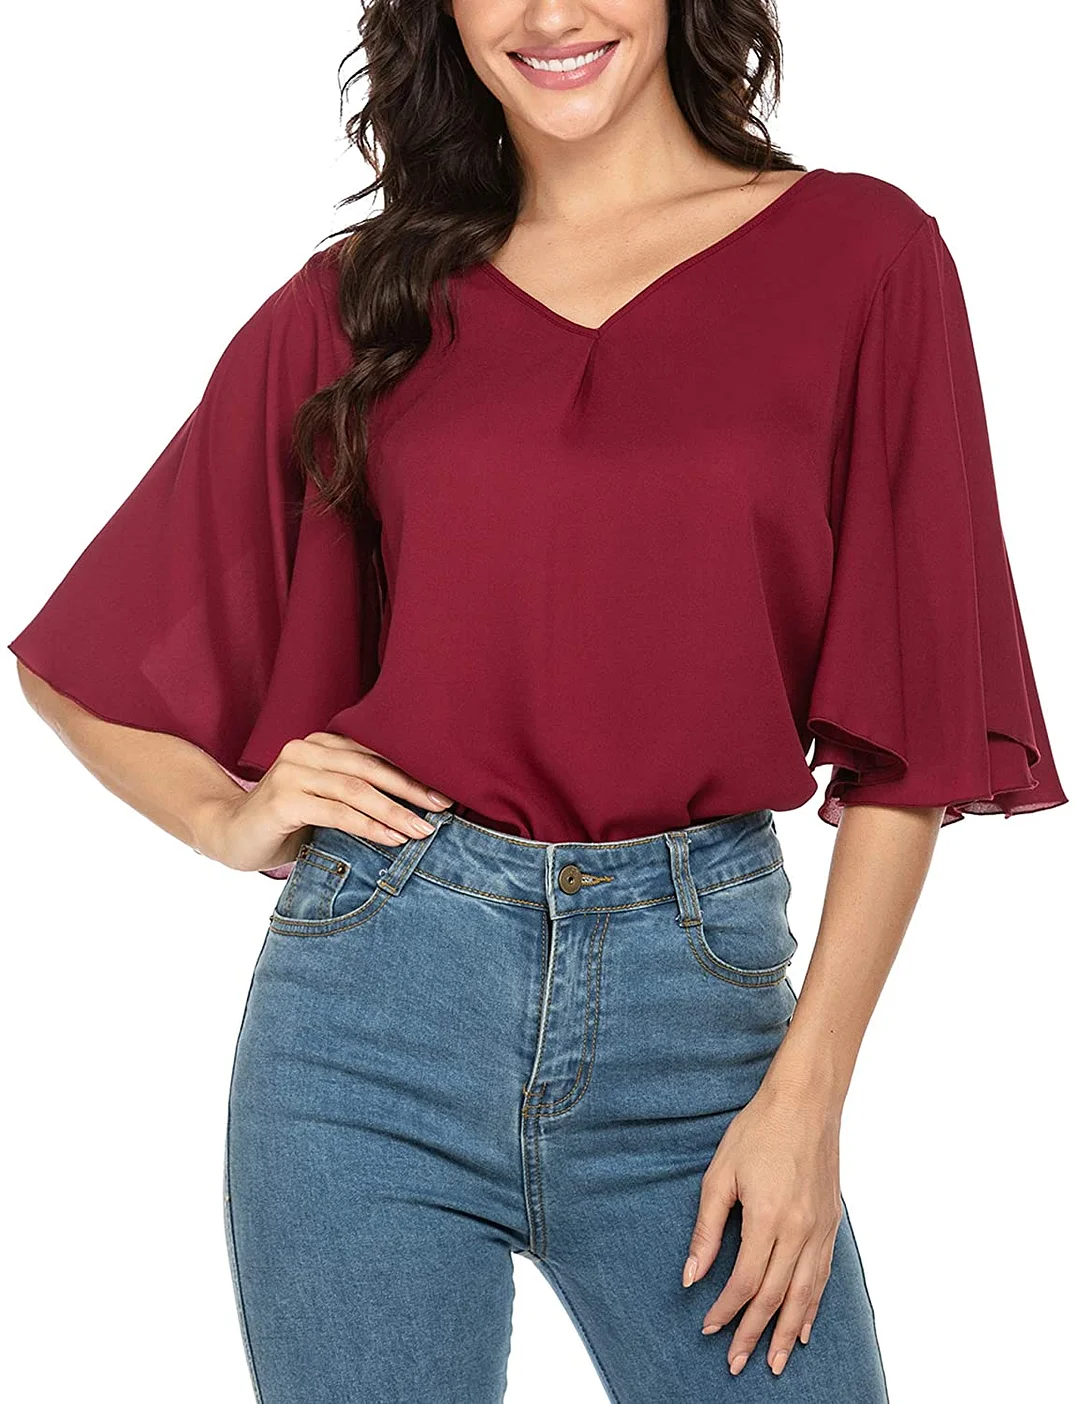 Womens V Neck Flutter Sleeve Elegant Chiffon Blouses Loose Tops Casual Solid Shirts